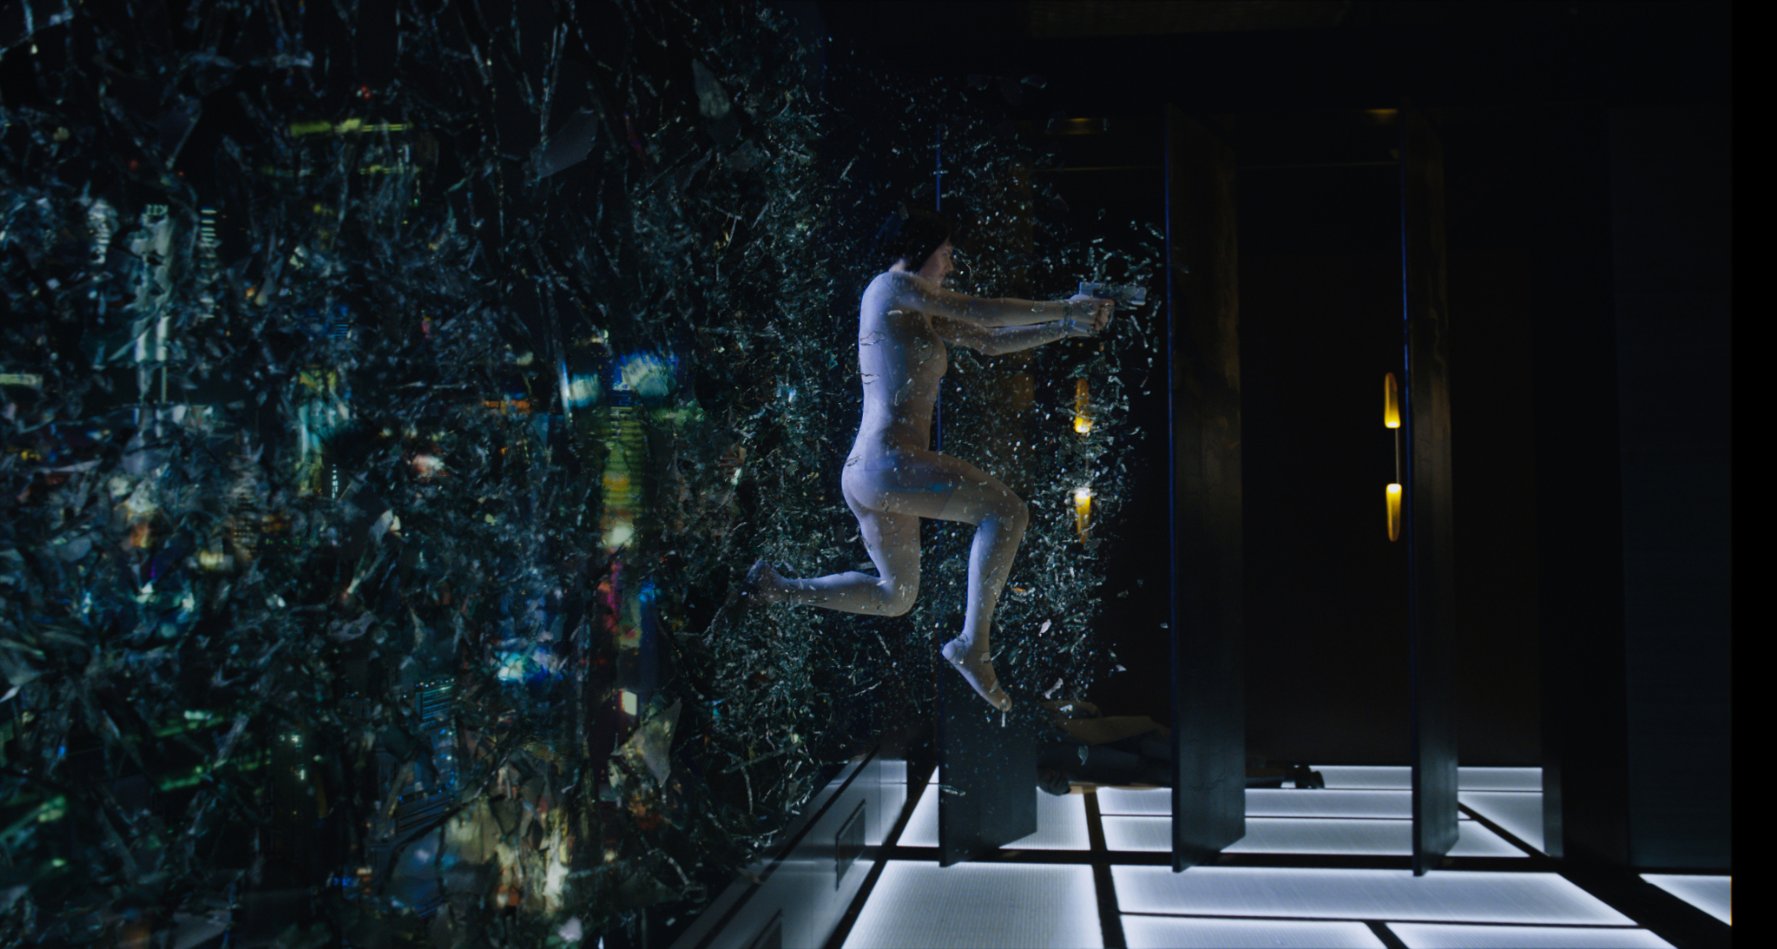 GHOST IN THE SHELL May Not Capture the Heart, But It Keeps the Eyes Captivated